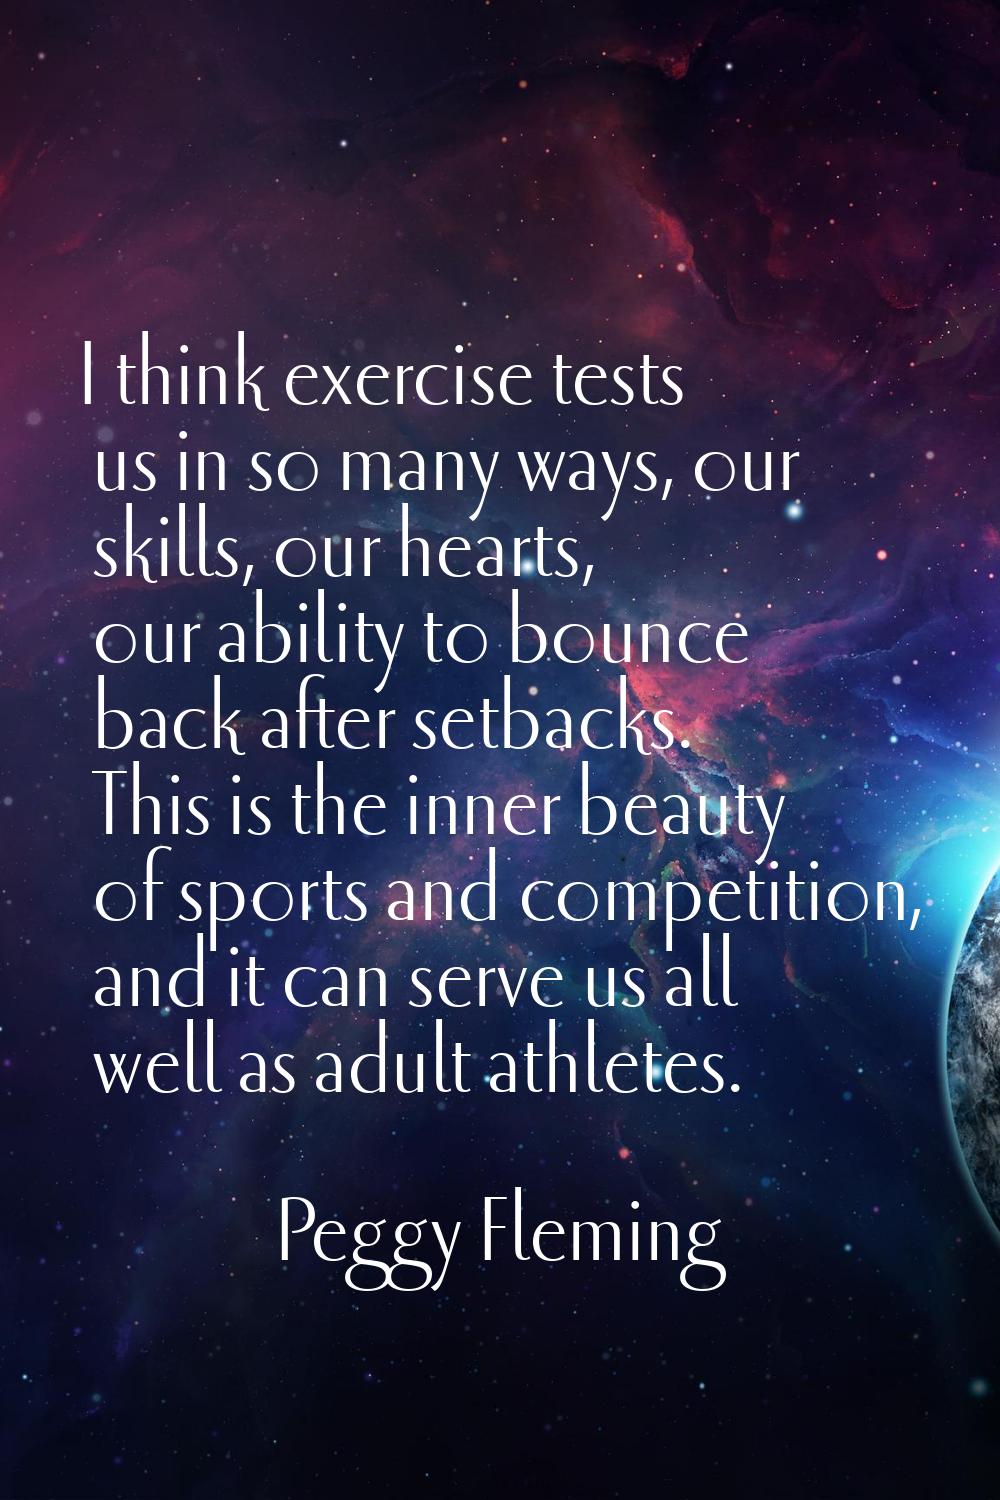 I think exercise tests us in so many ways, our skills, our hearts, our ability to bounce back after